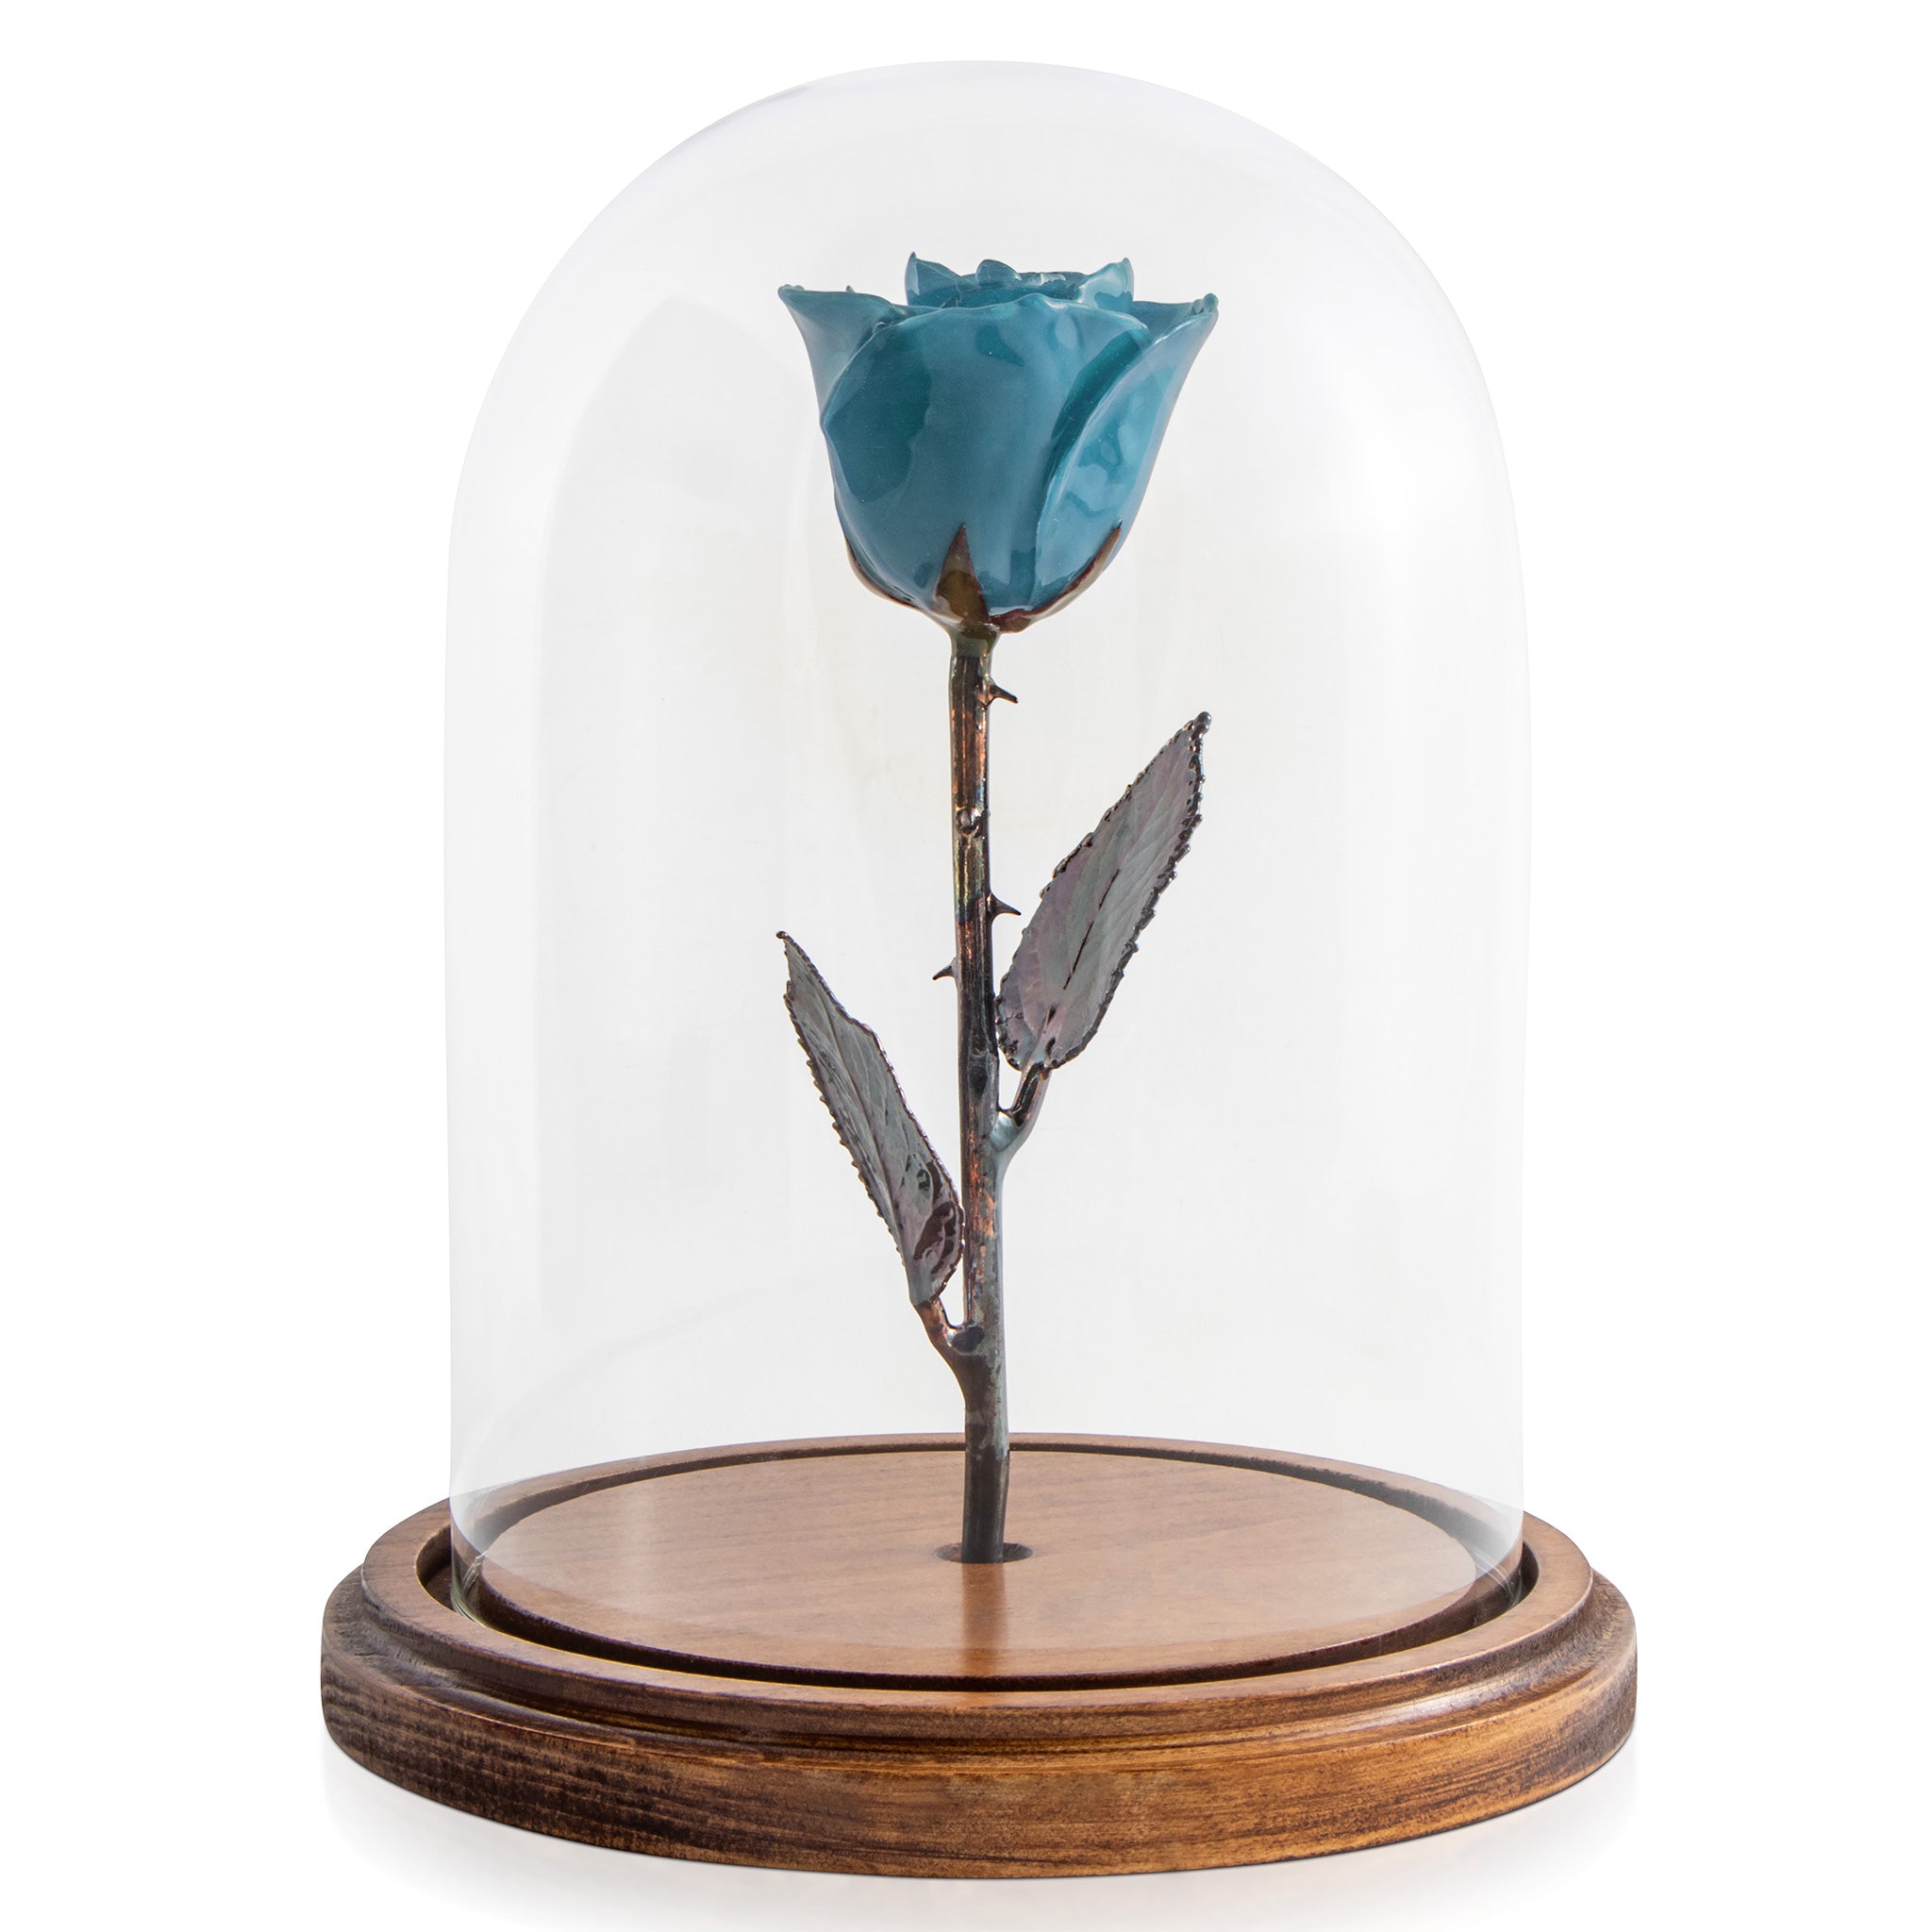 Blue Enchanted Rose (aka Beauty & The Beast Rose) with Patina Copper Stem Mounted to A Hand Turned Solid Wood Base under a glass dome. 